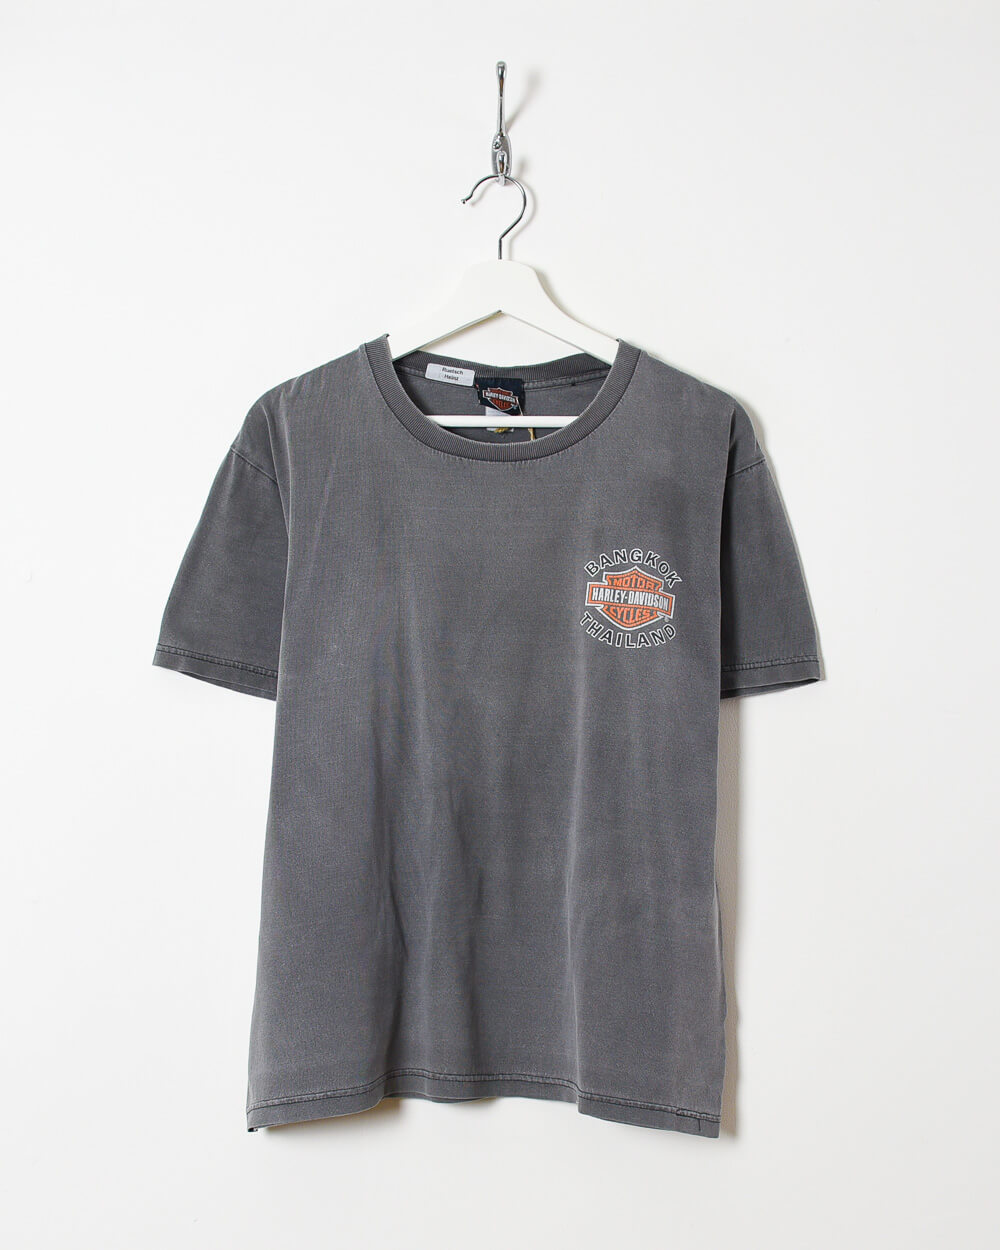 Hollister Gray Marl Two Tone Printed Cotton Round Neck Short Sleeve T-Shirt  Size